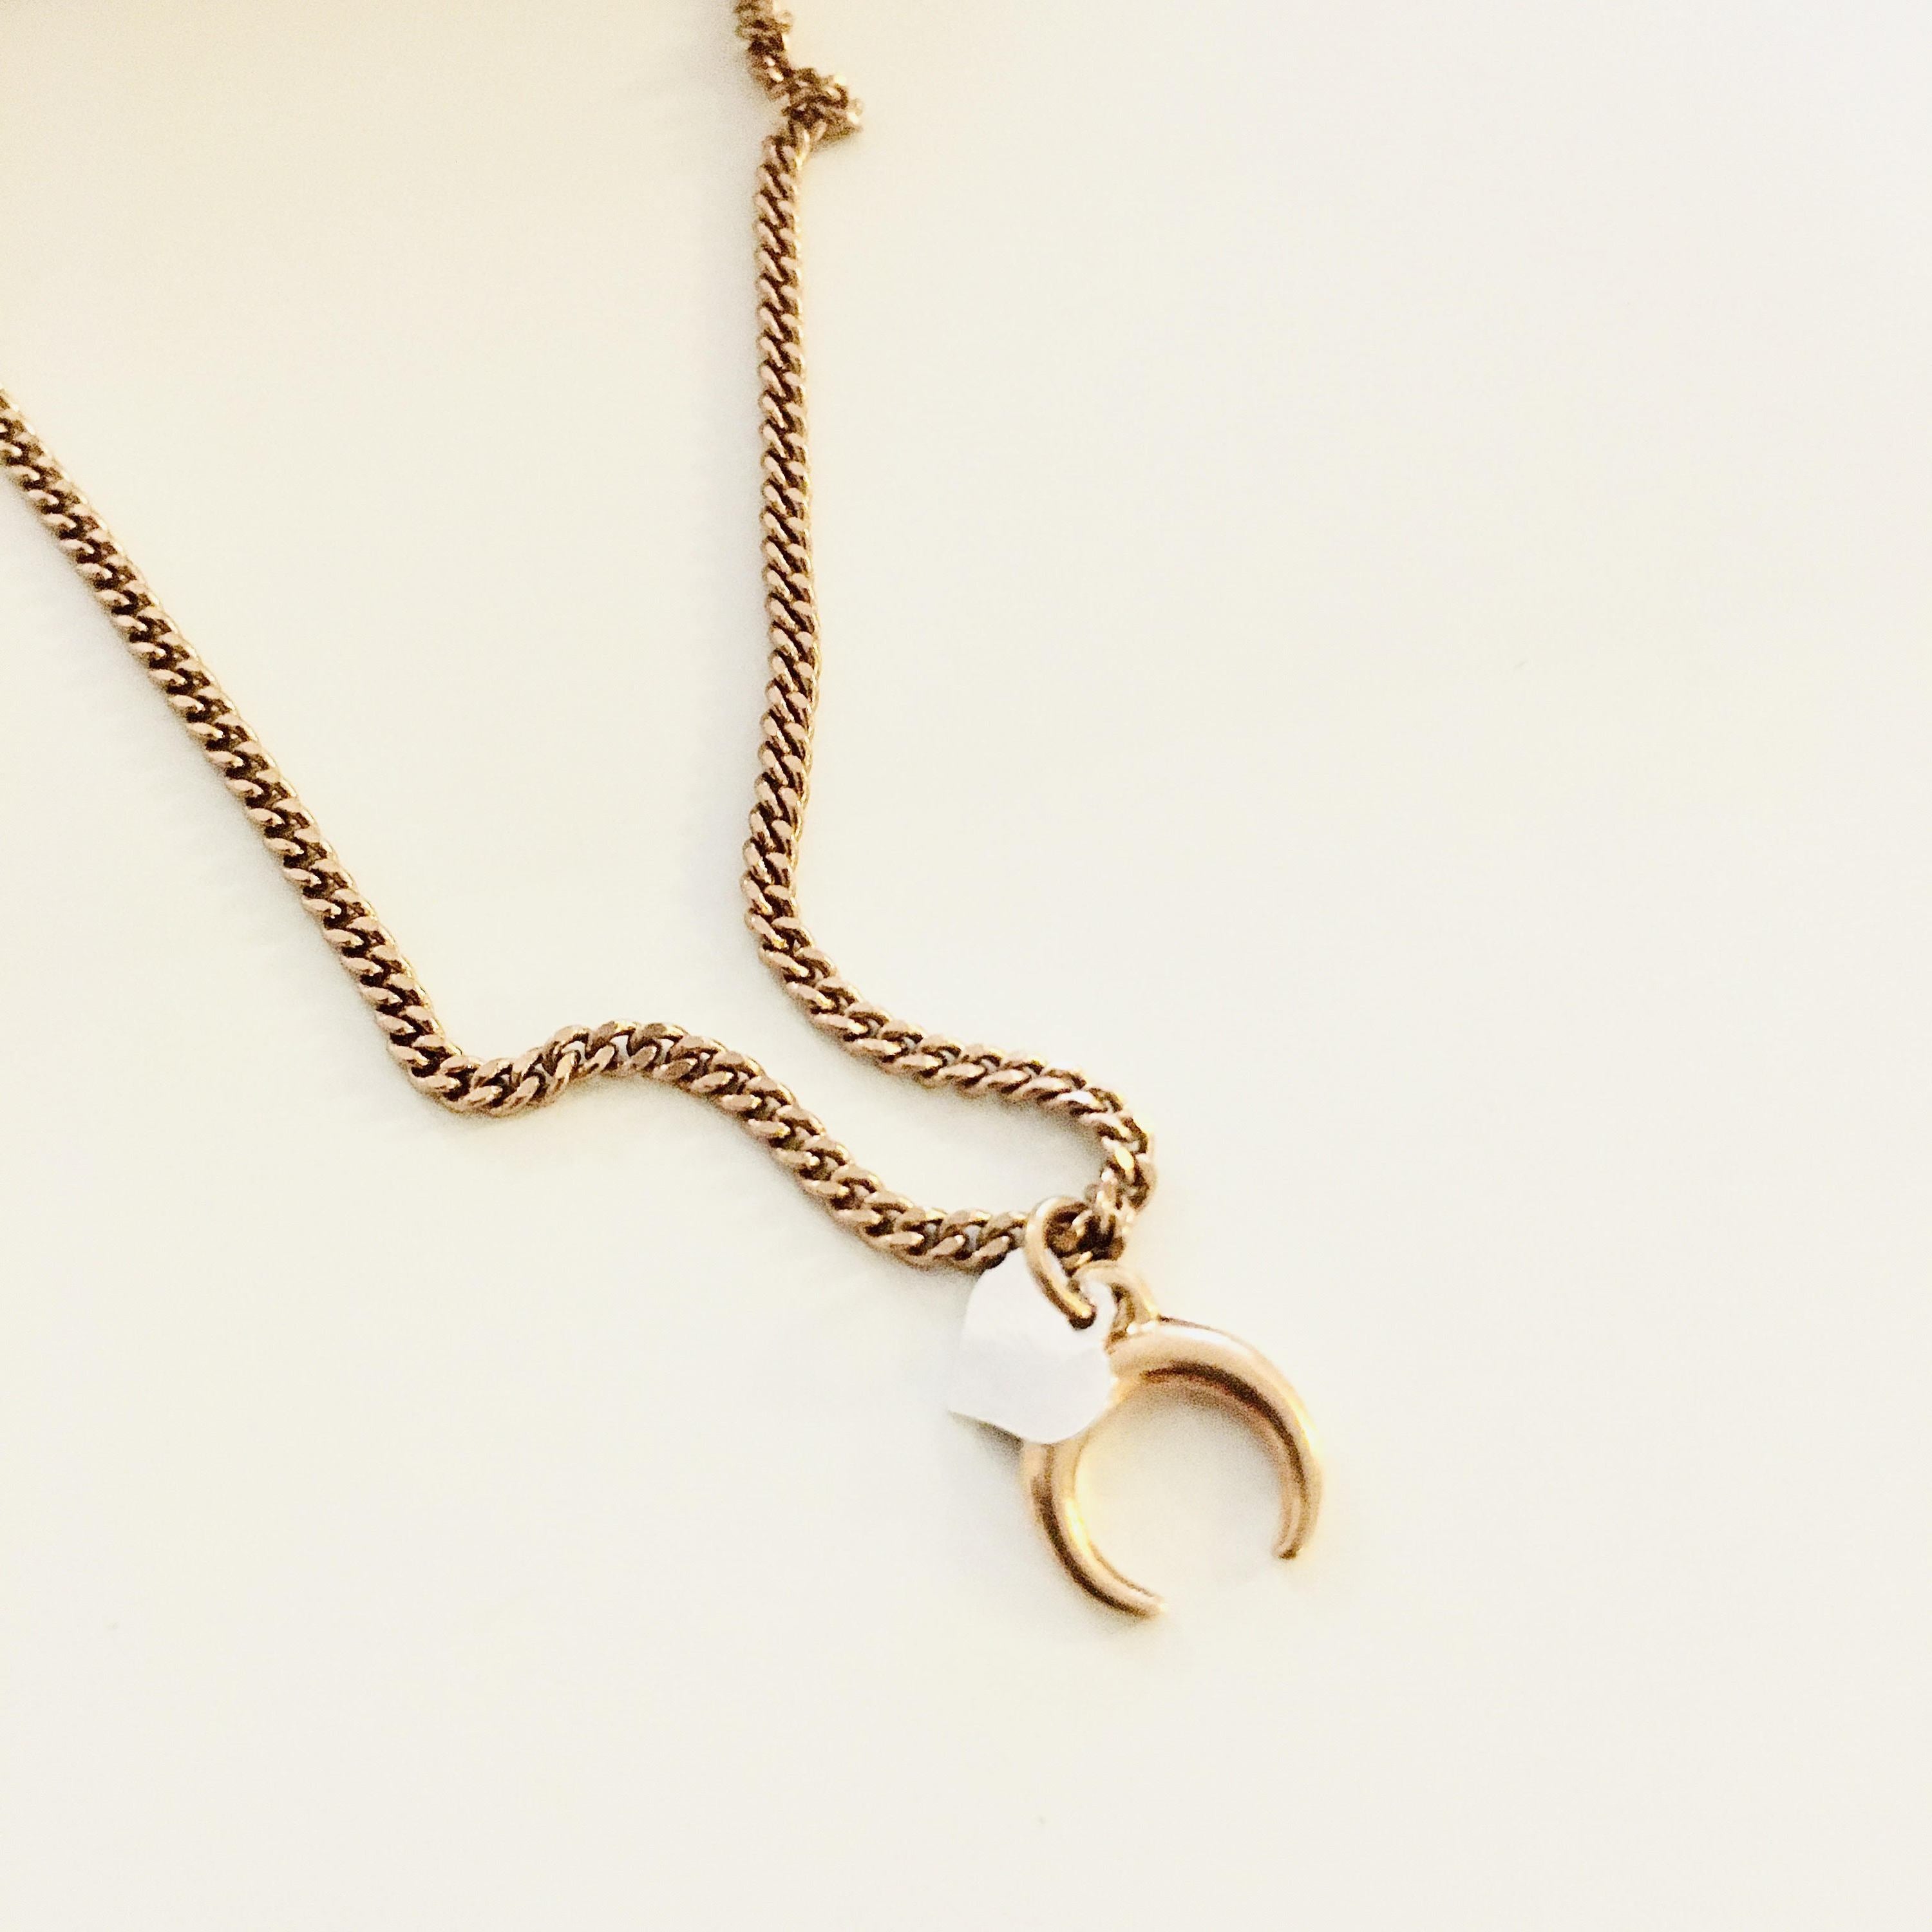 Crescent Moon Necklace in Gold.